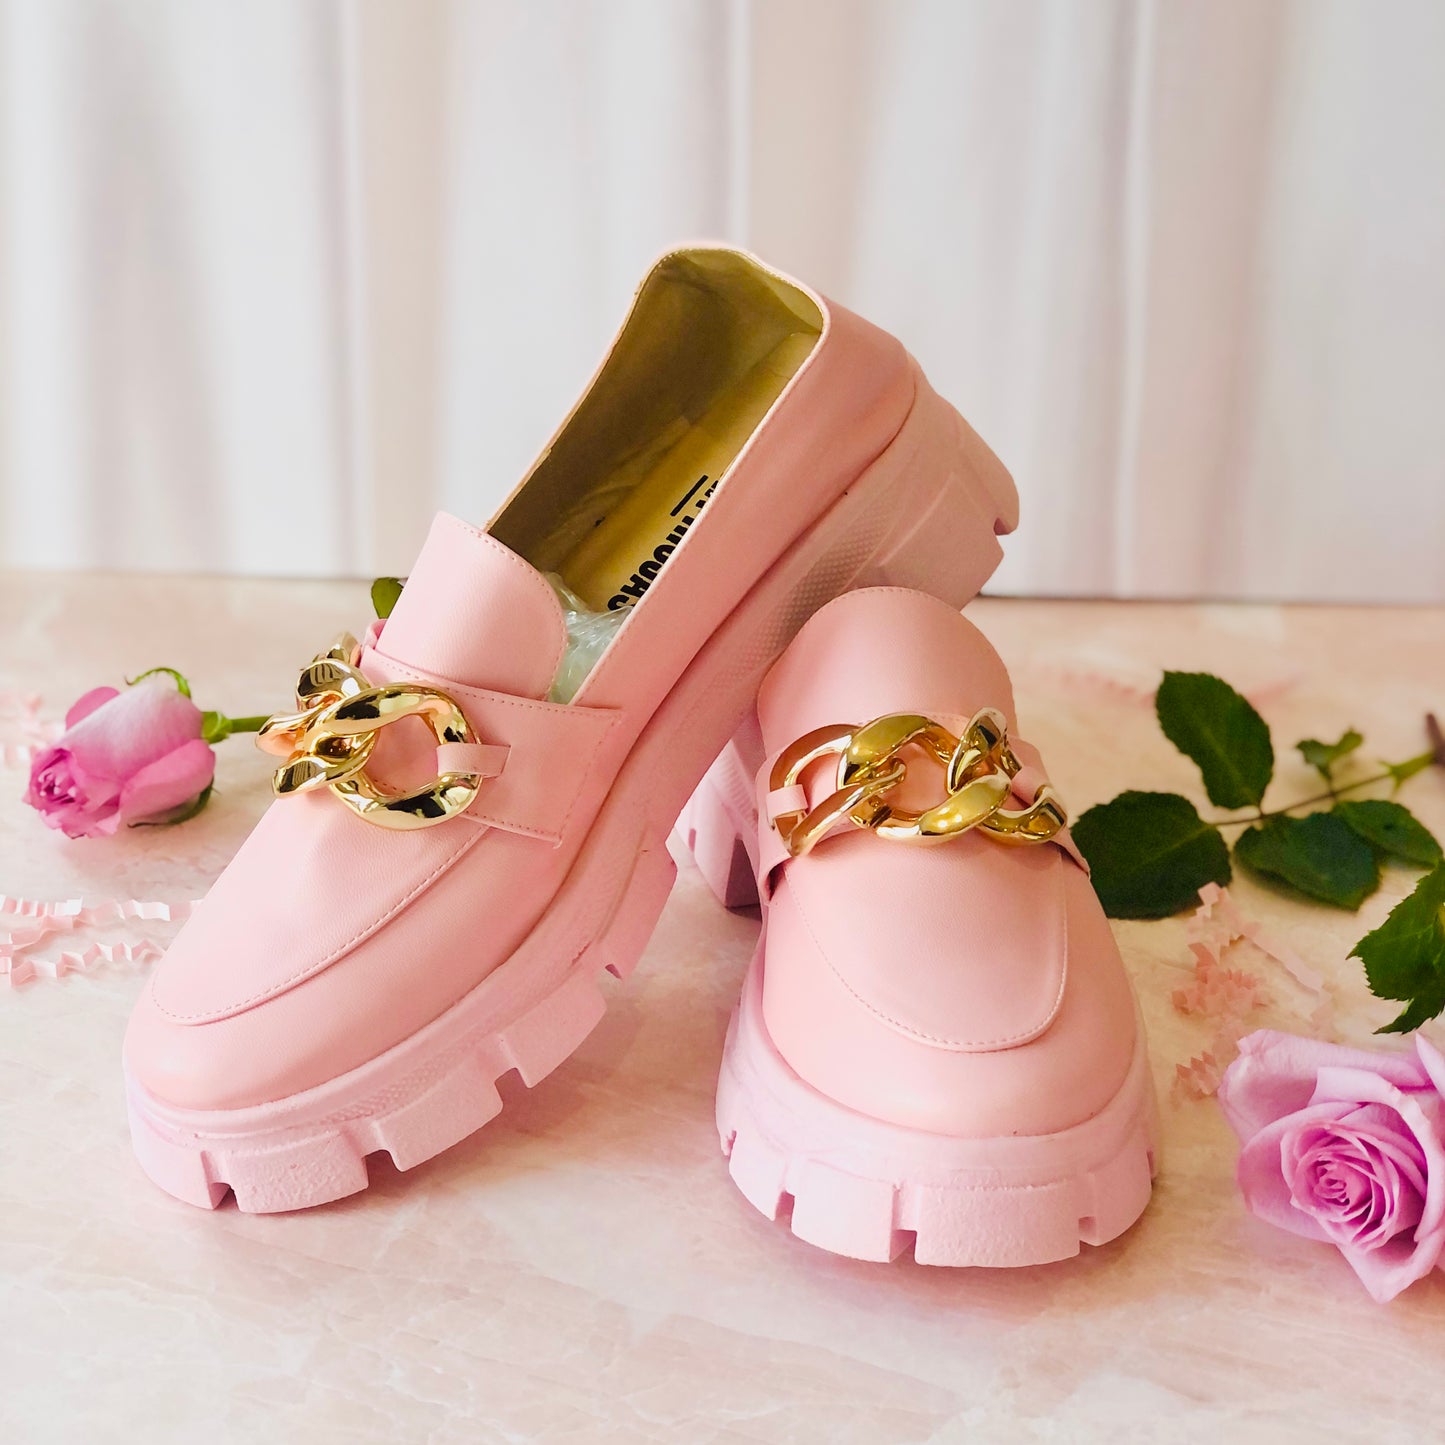 PINK MACARENA LOAFERS